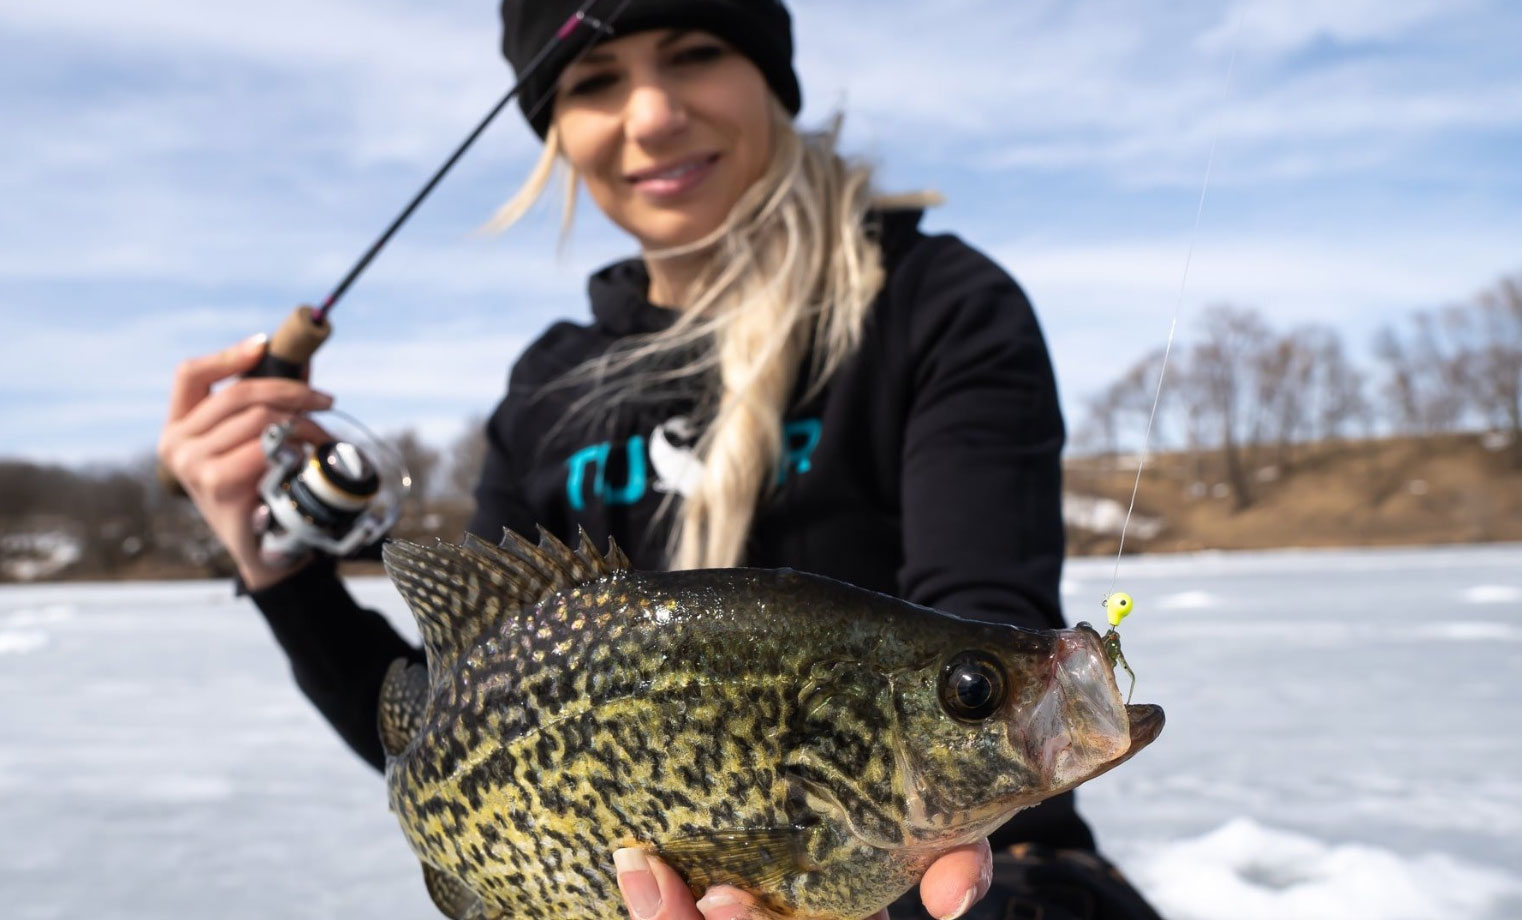 Ice fishing for crappie.